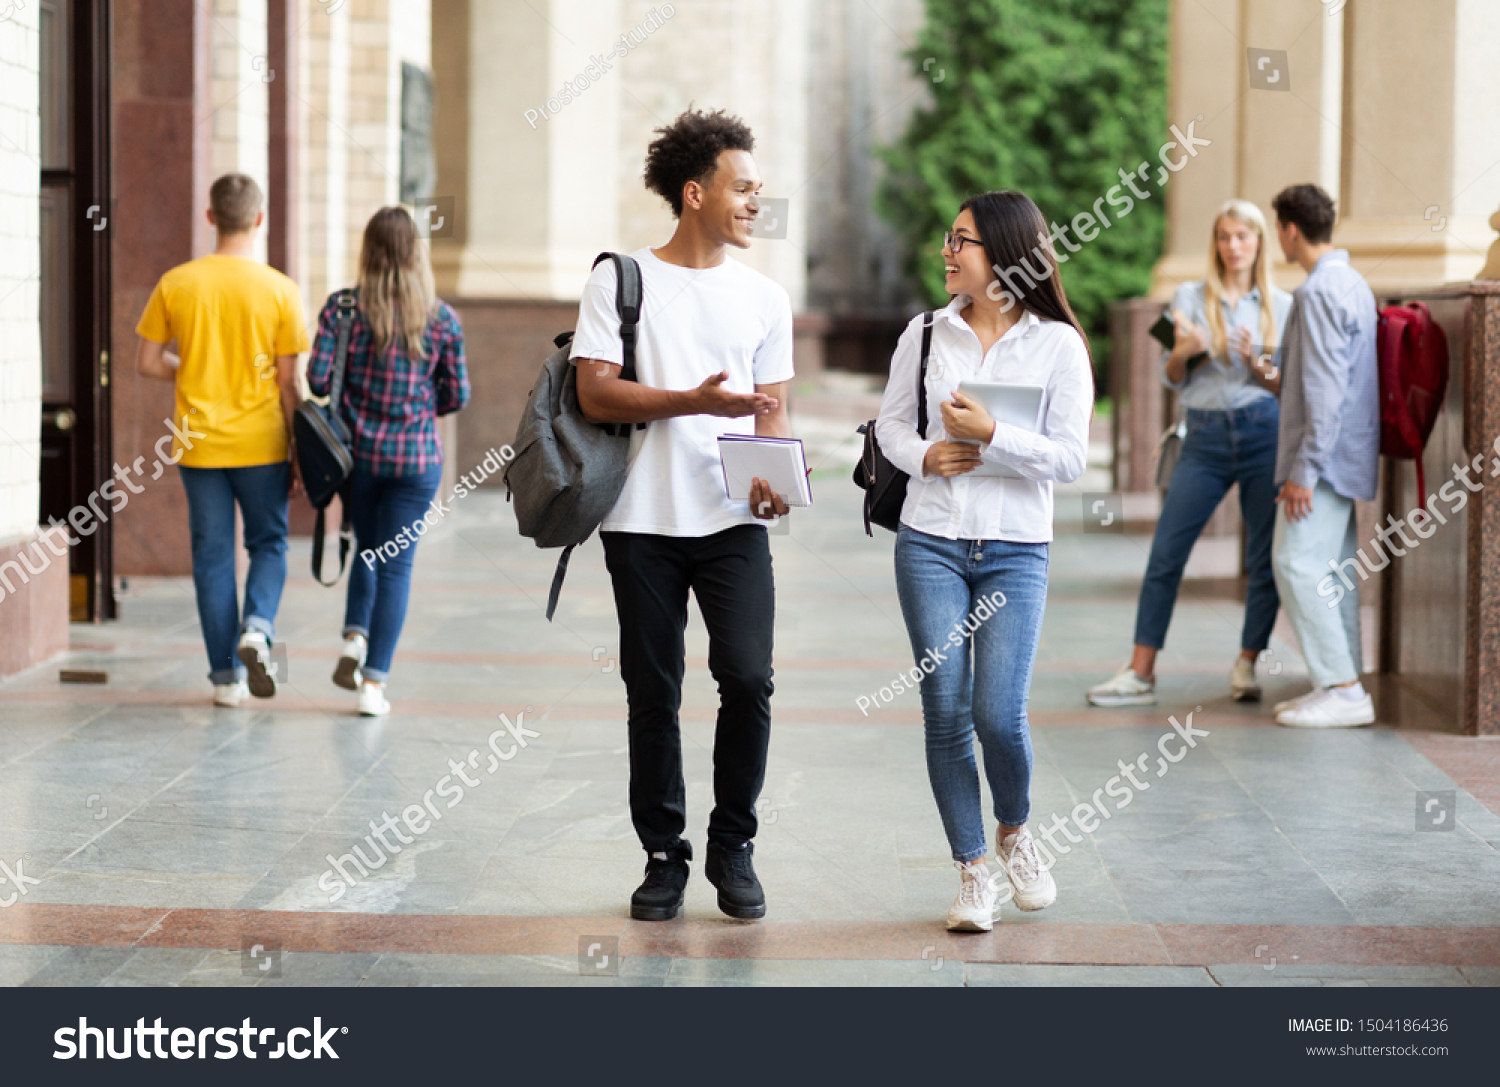 Diverse classmates chatting, walking after classes in university campus outdoors #1504186436